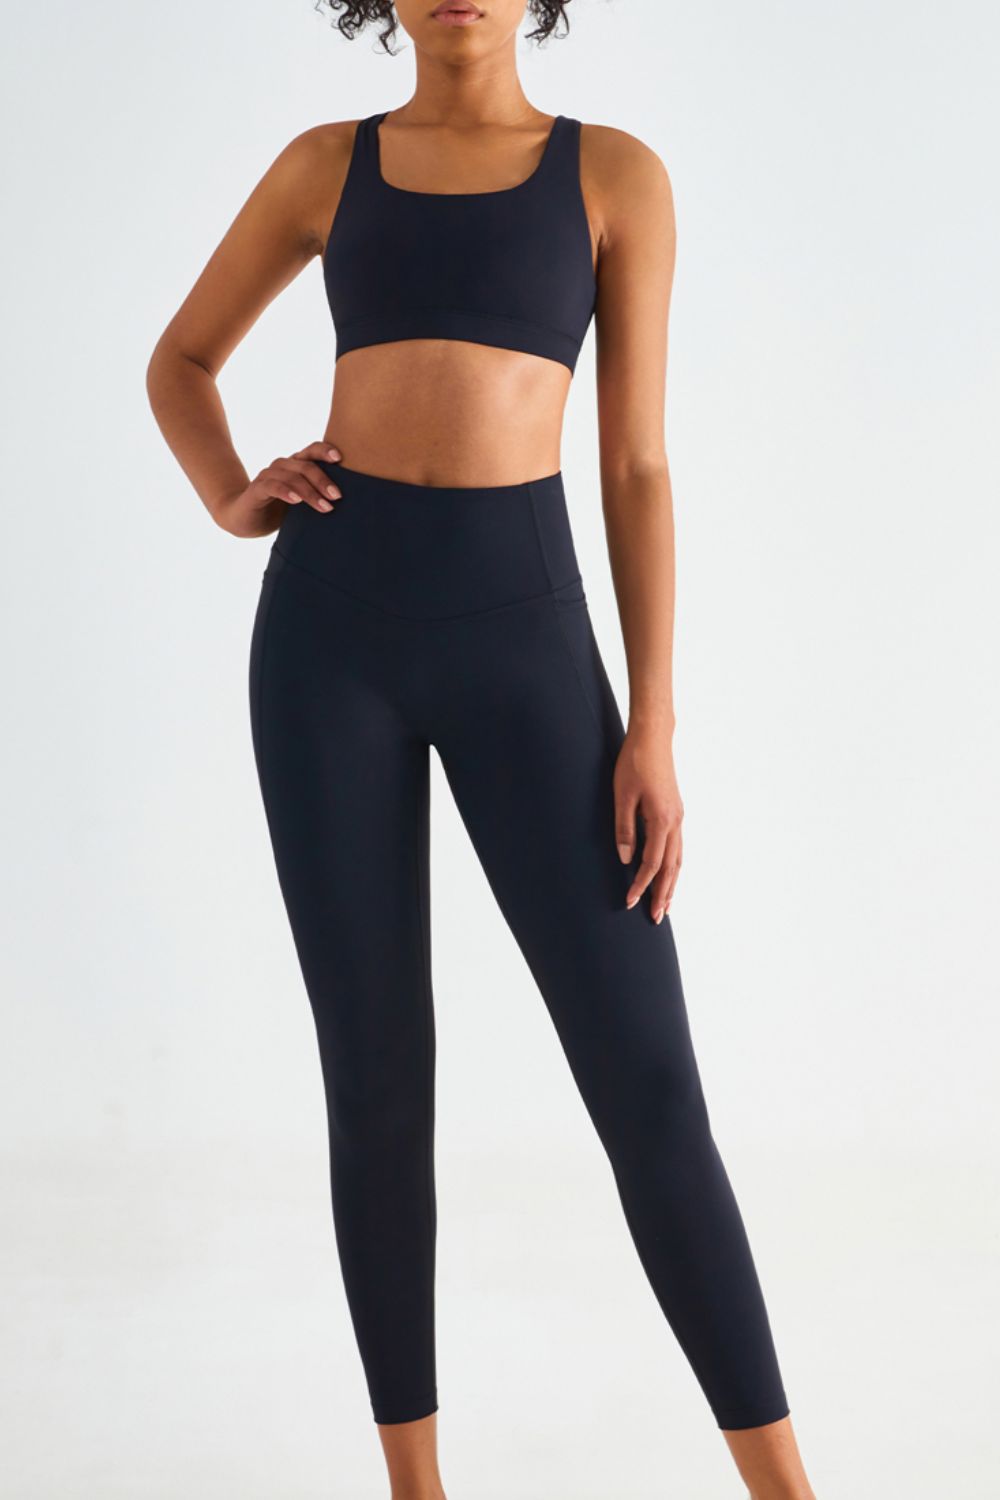 Women’s Wide Waistband Sports Leggings with Pockets